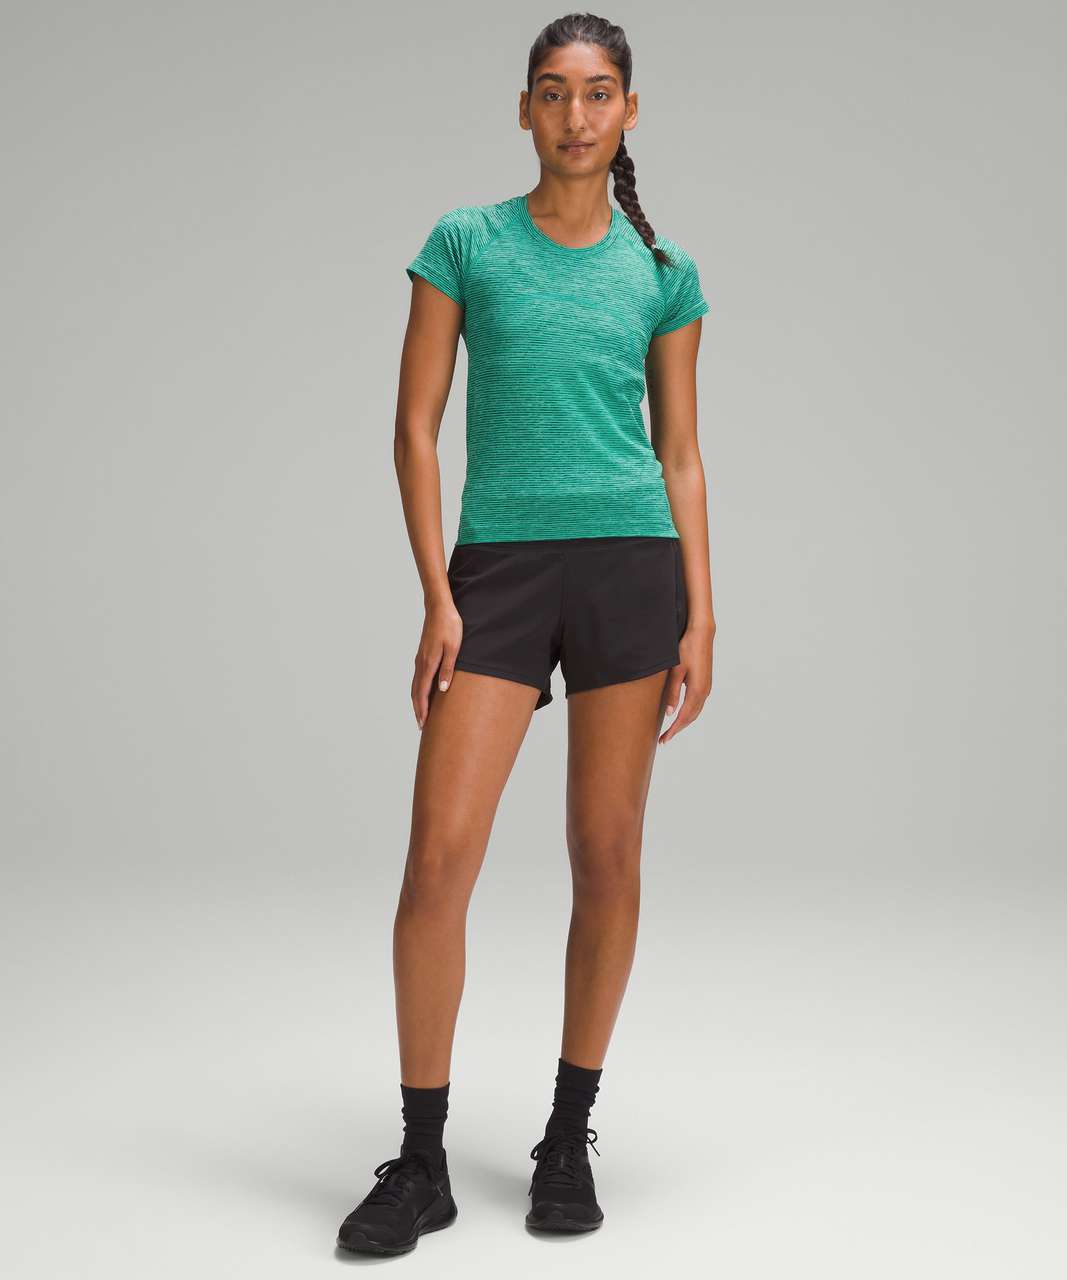 Lululemon Swiftly Tech Short-Sleeve Shirt 2.0 *Race Length - Wee Are From Space Kelly Green